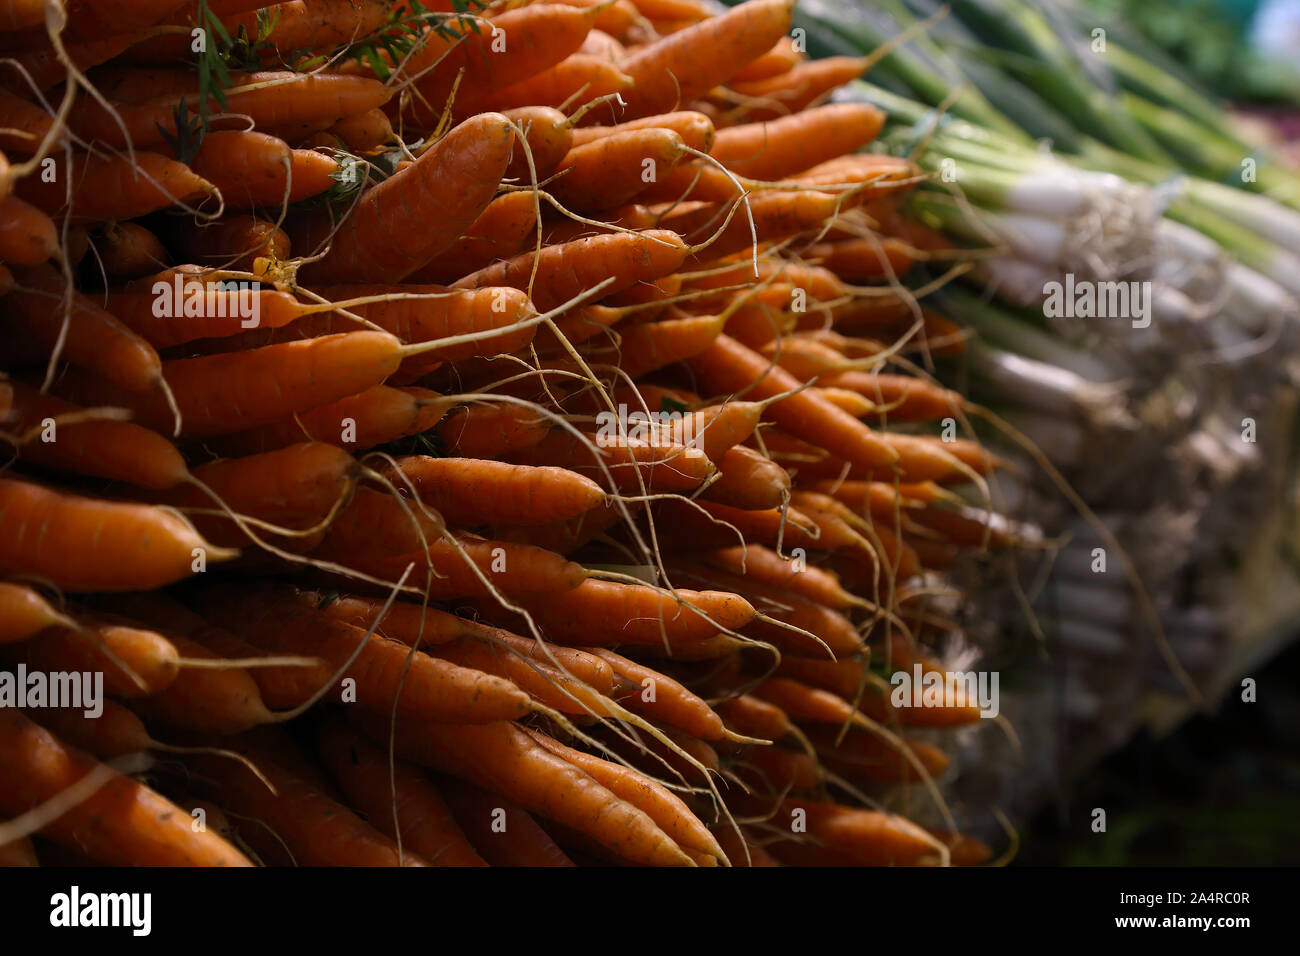 Biologic, natural cultivated sweet carrots on a market counter. Vegetables from the farmers market. Ecologic products. Natural background. Stock Photo